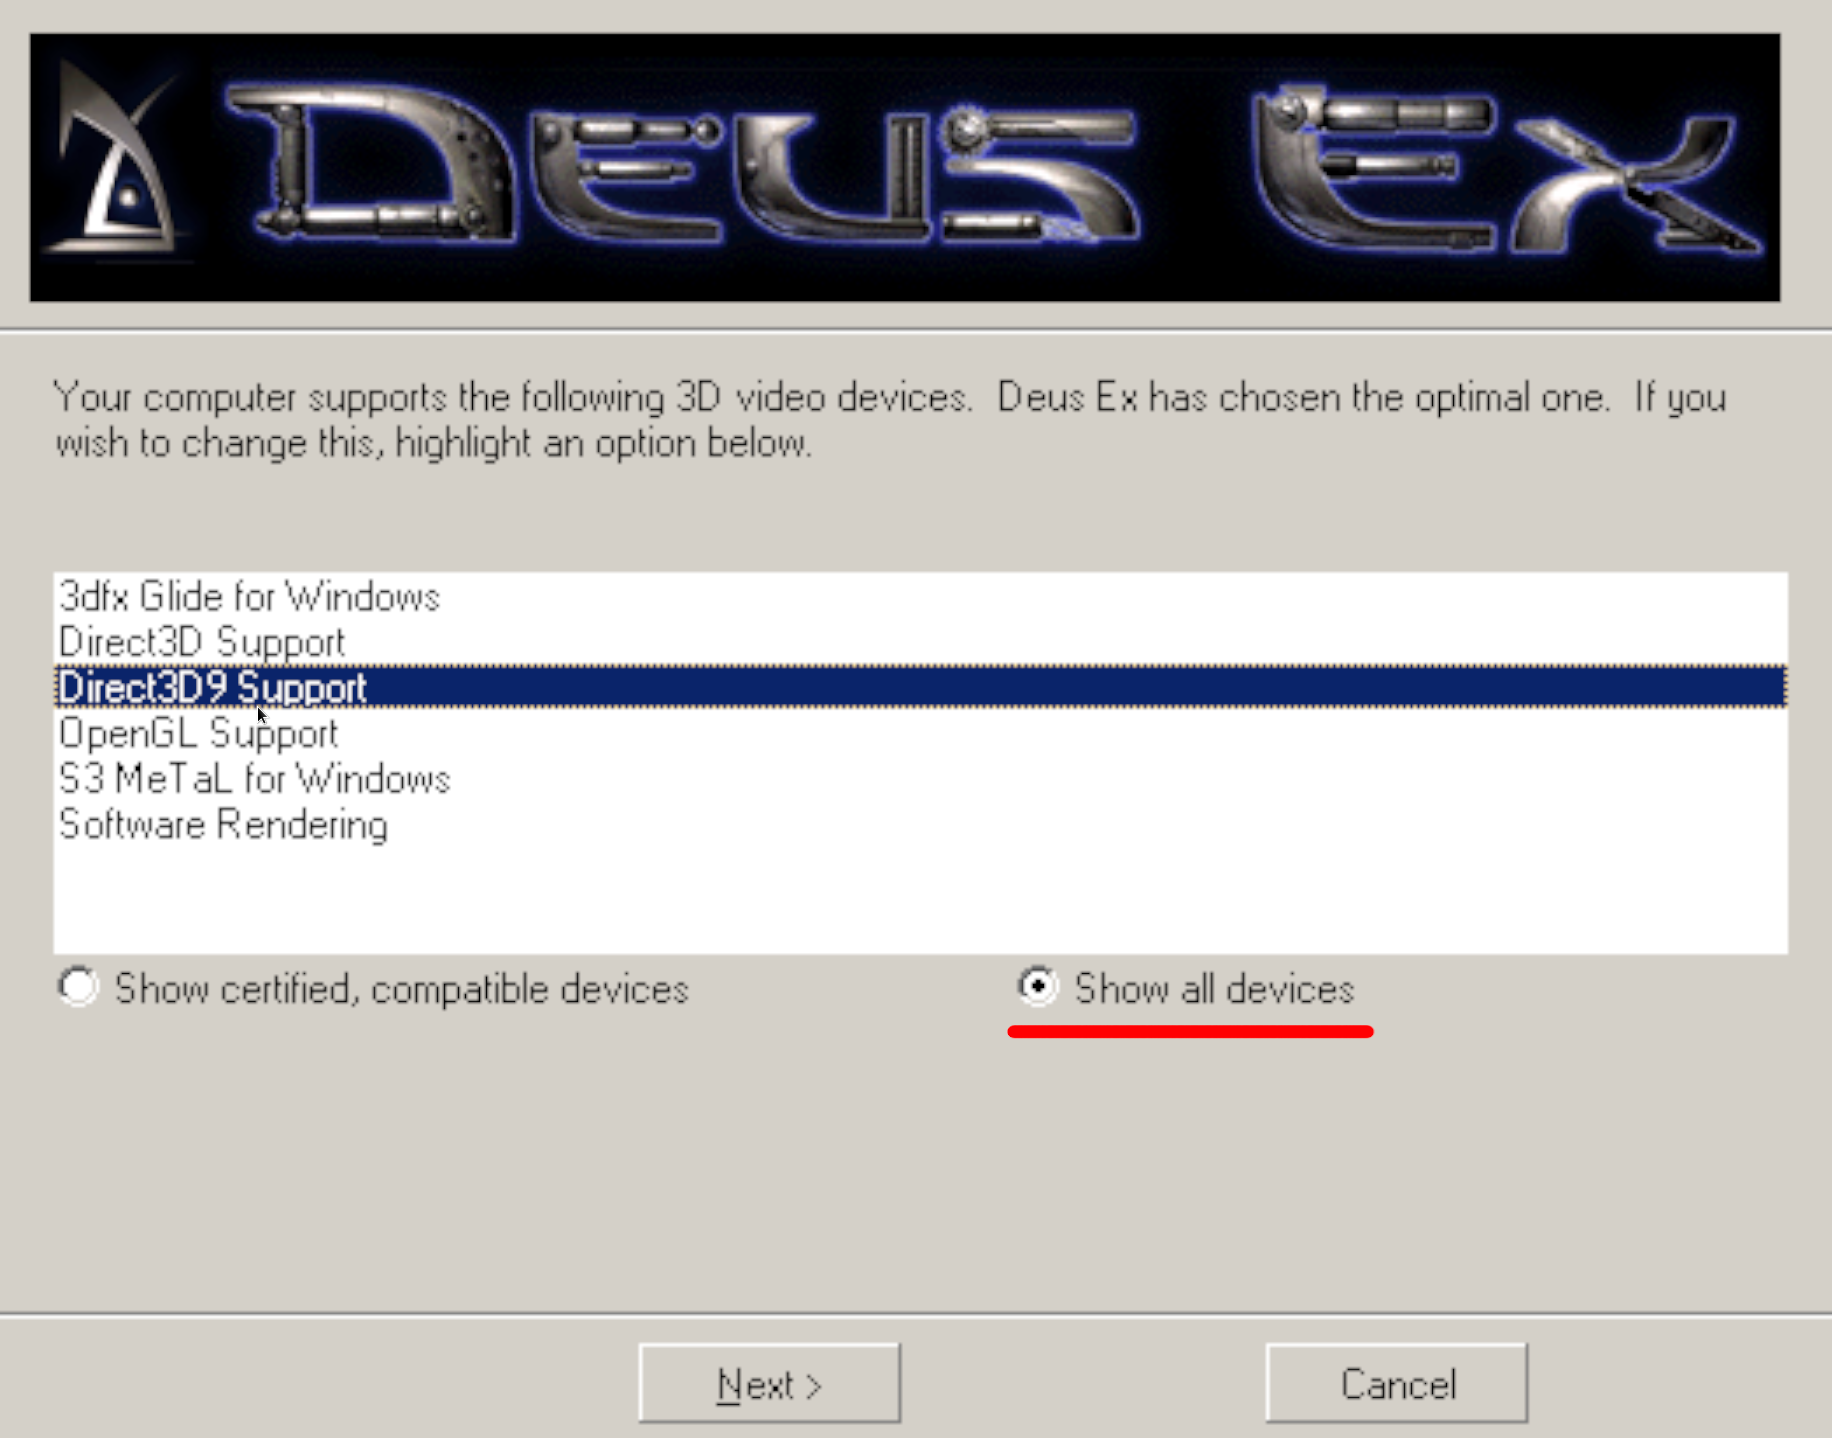 A window with the title &ldquo;Deus Ex&rdquo; in a stylized font. Below it lists several options such as &ldquo;Direct3D Support&rdquo;, &ldquo;Direct3D9 Support&rdquo;, and &ldquo;OpenGL Support&rdquo;. Direct3D9 is selected. Below are two radio buttons, with the one titled &ldquo;Show all devices&rdquo; selected.